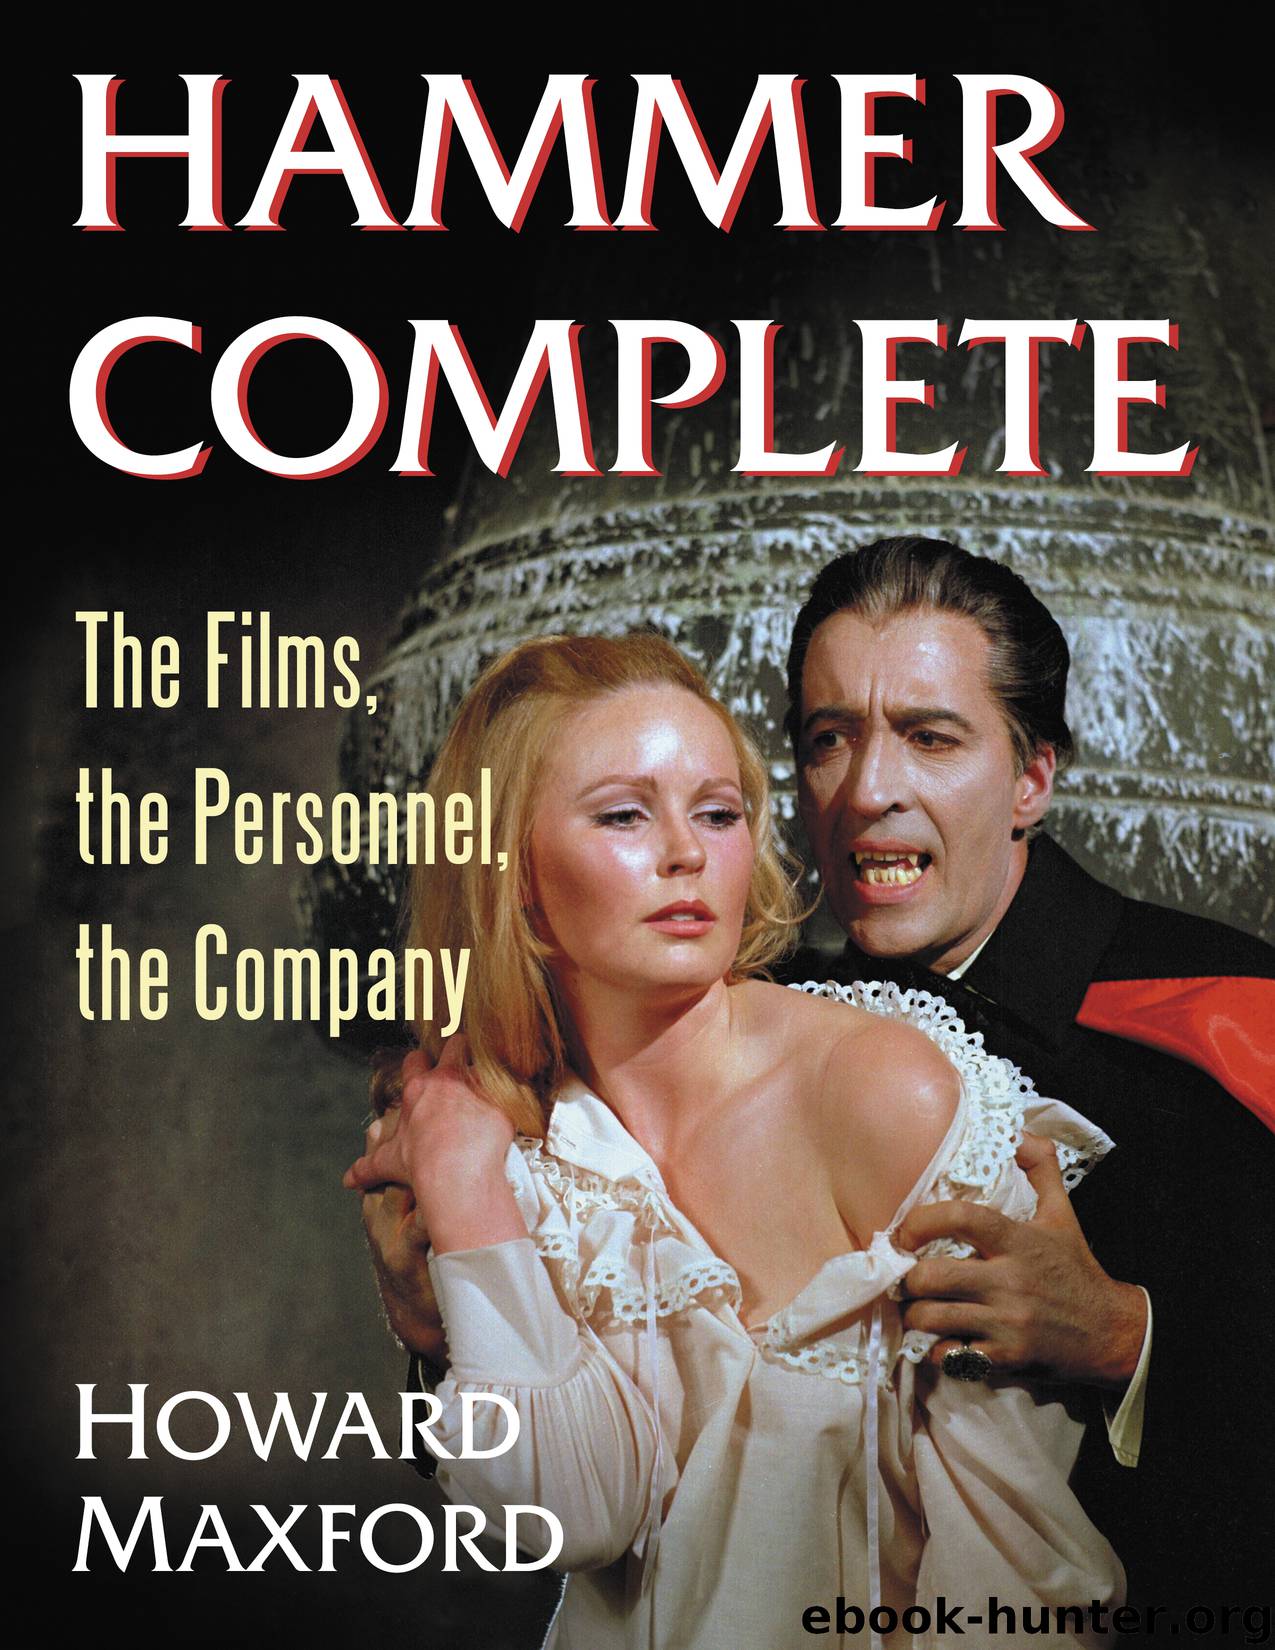 Hammer Complete by Howard Maxford